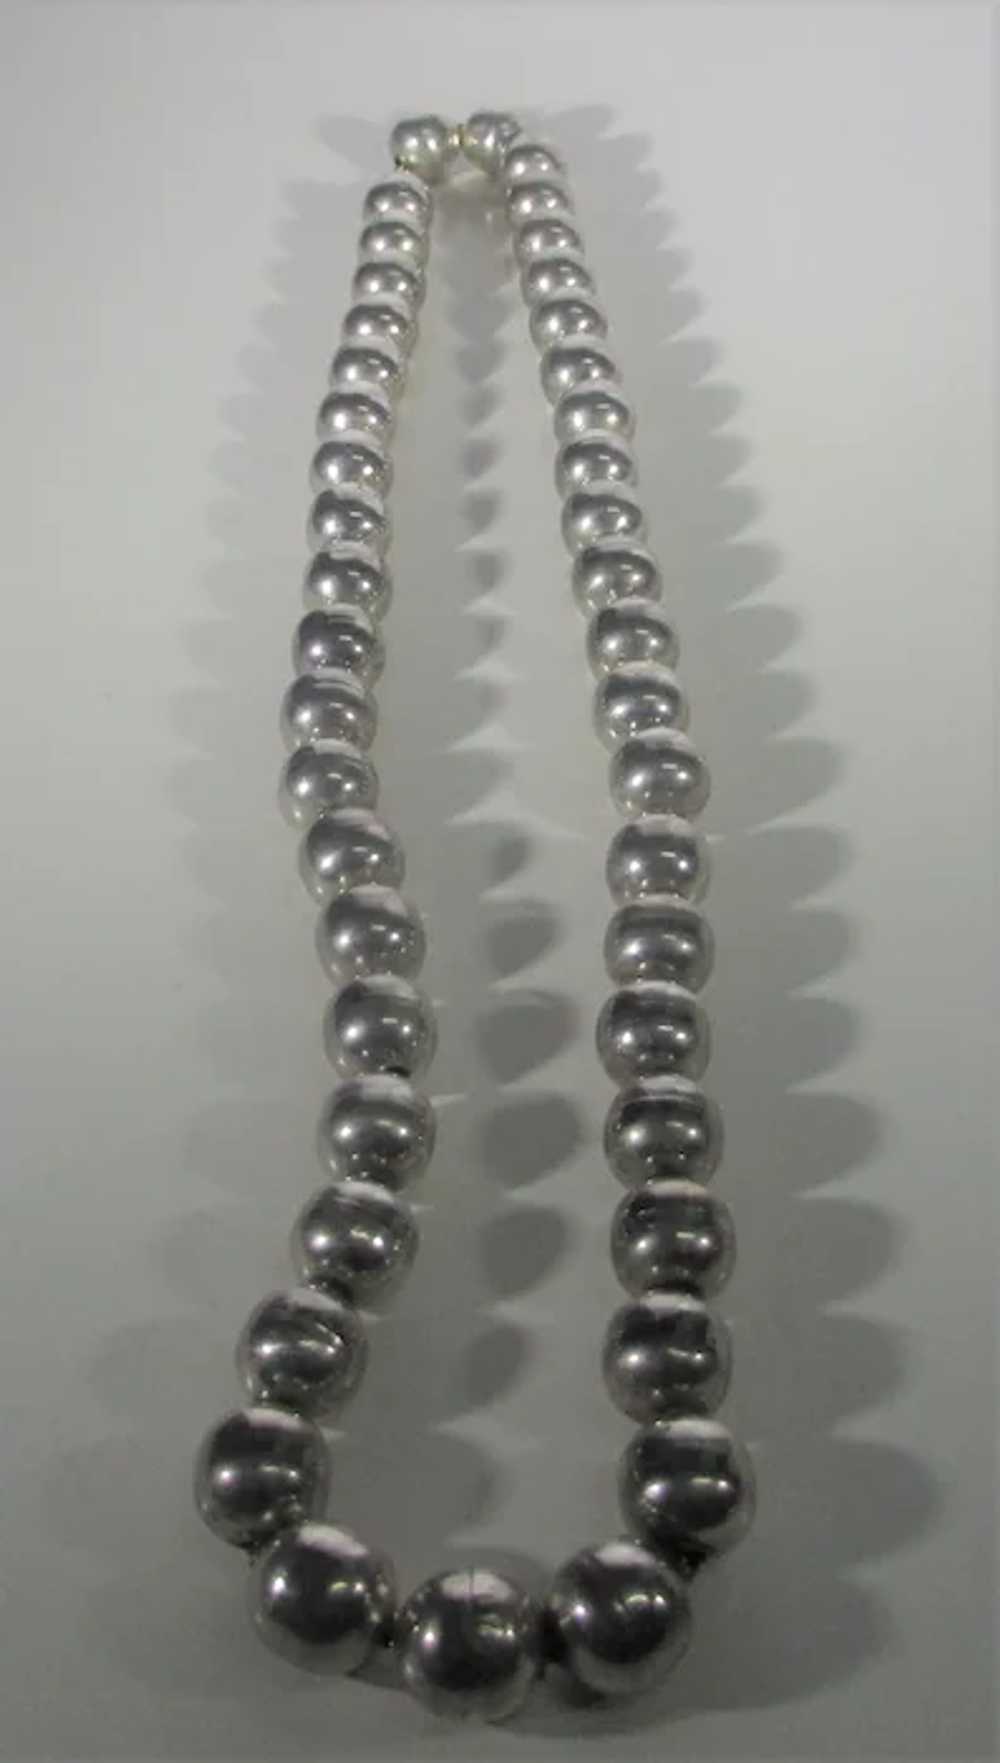 Vintage Silver Tone Beads on a Chain by AlPaca - image 12